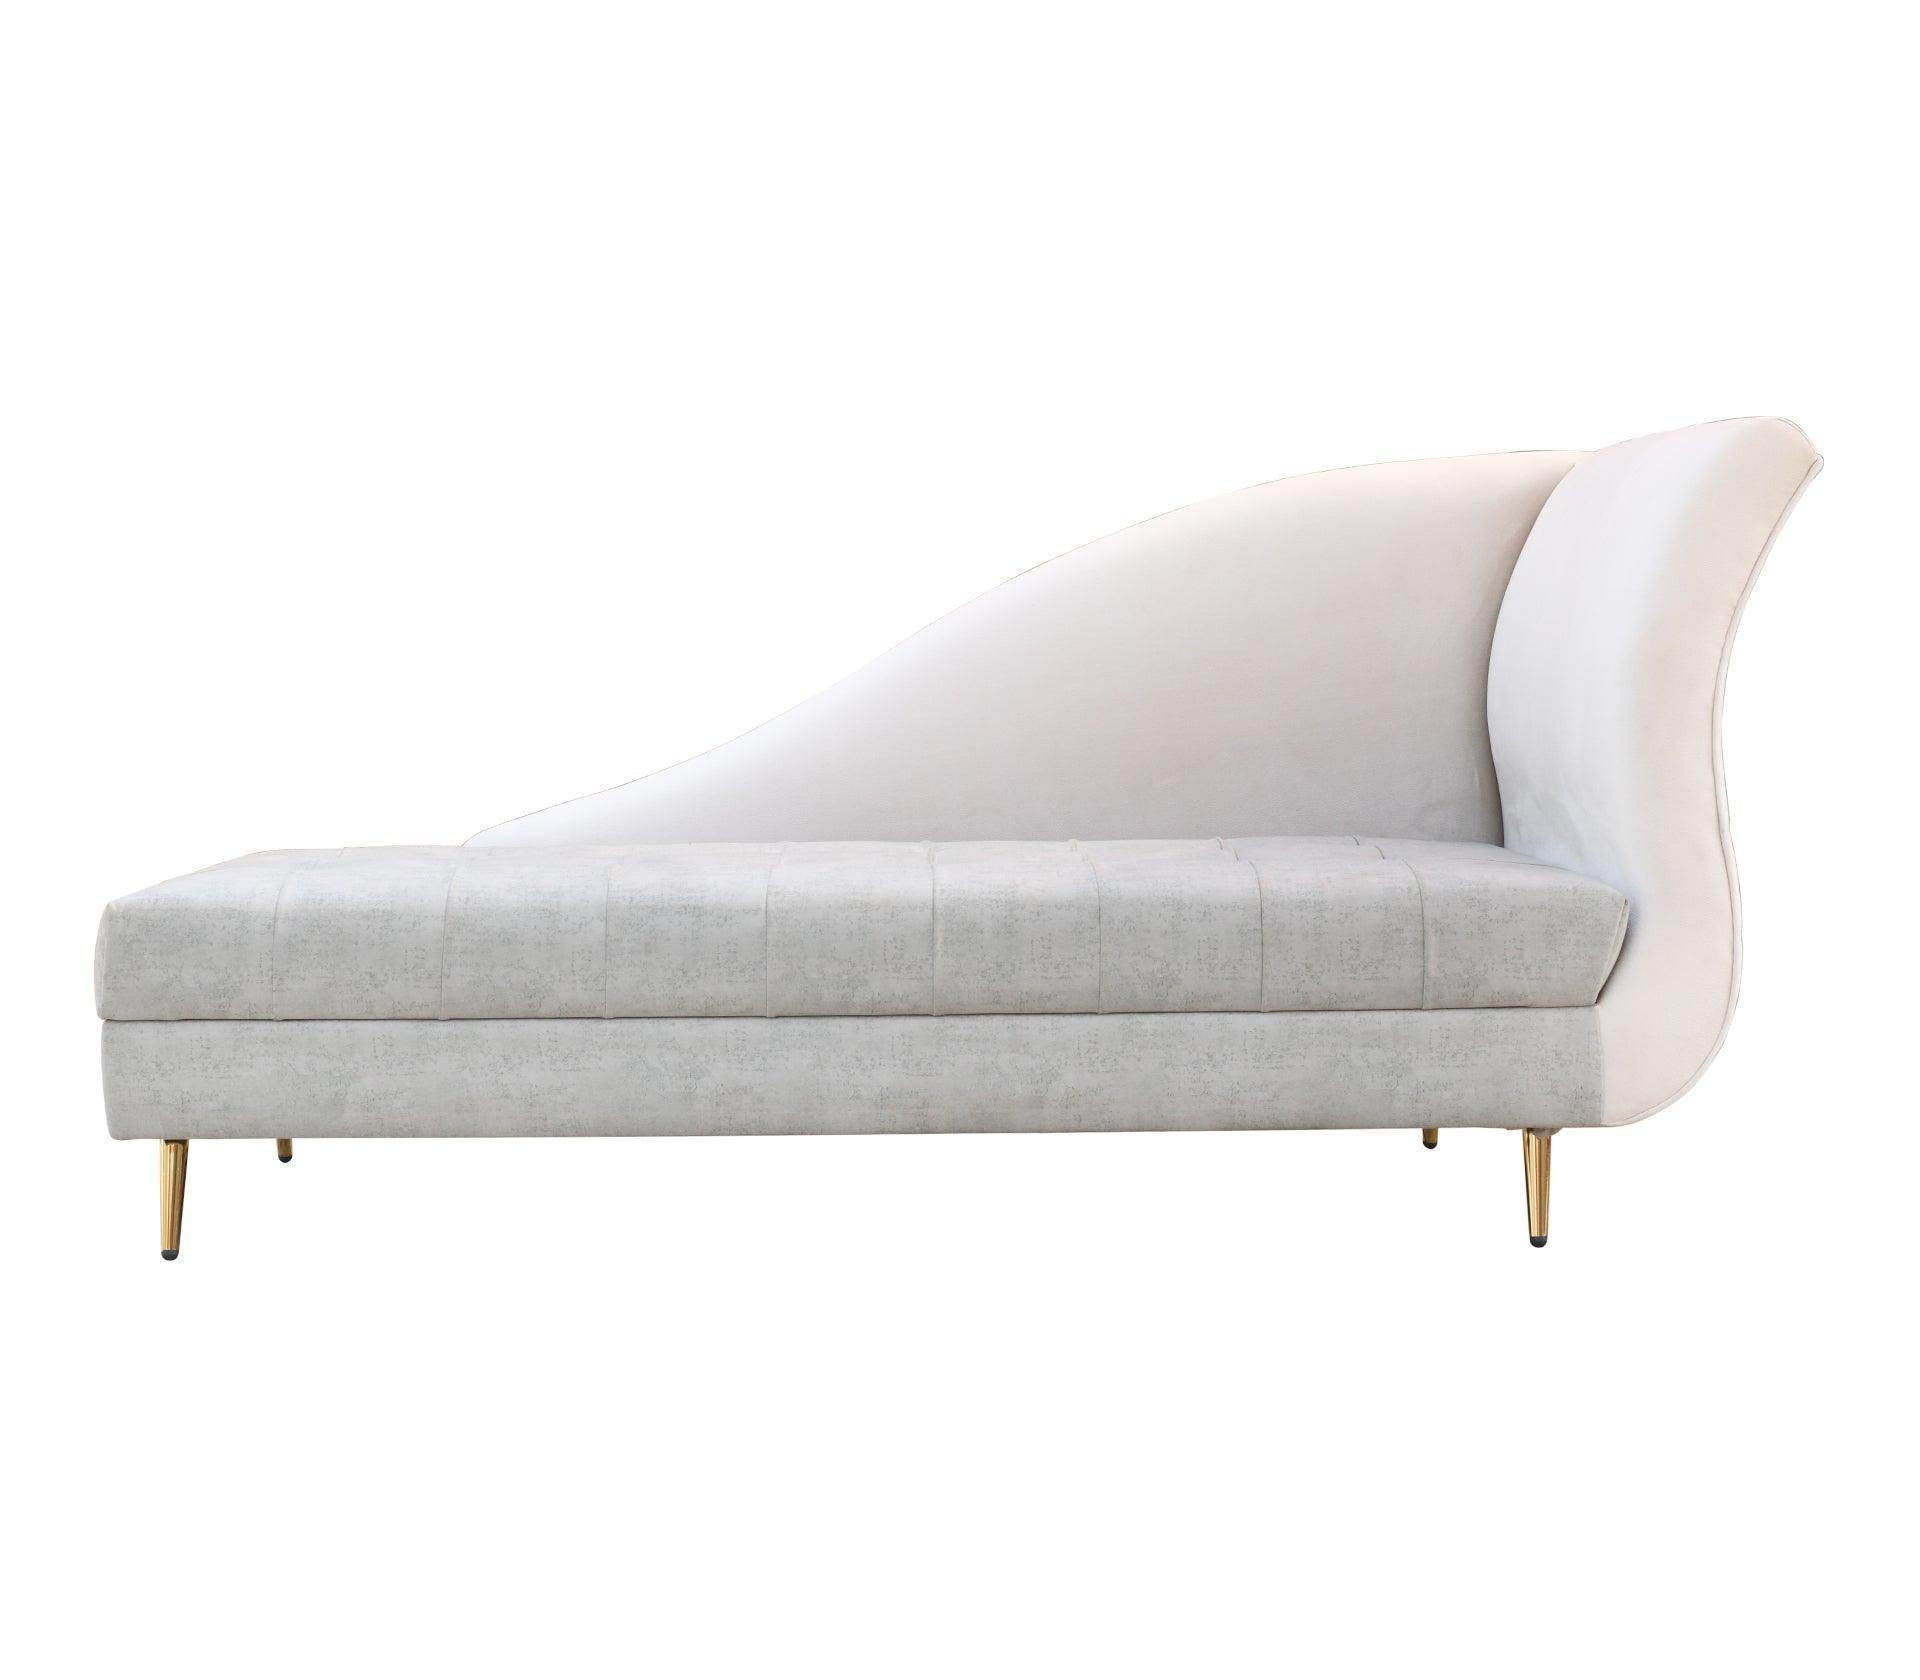 Milky Cream Sofa Chaise With Golden Legs - Furniture Castle